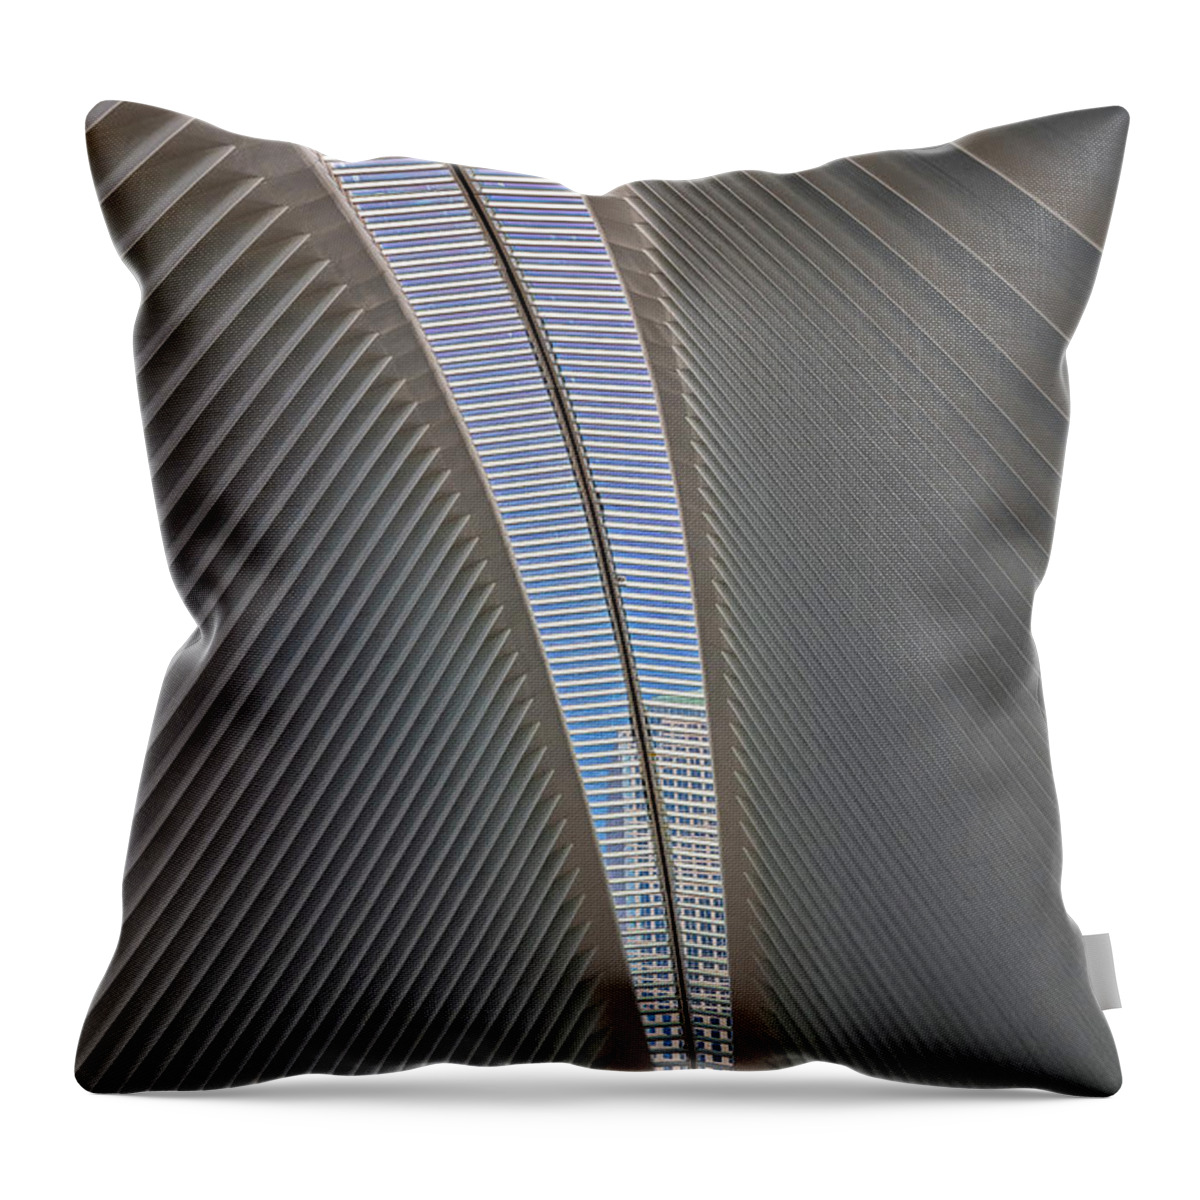 The Oculus Throw Pillow featuring the photograph Articulated Angles by Angelo Marcialis